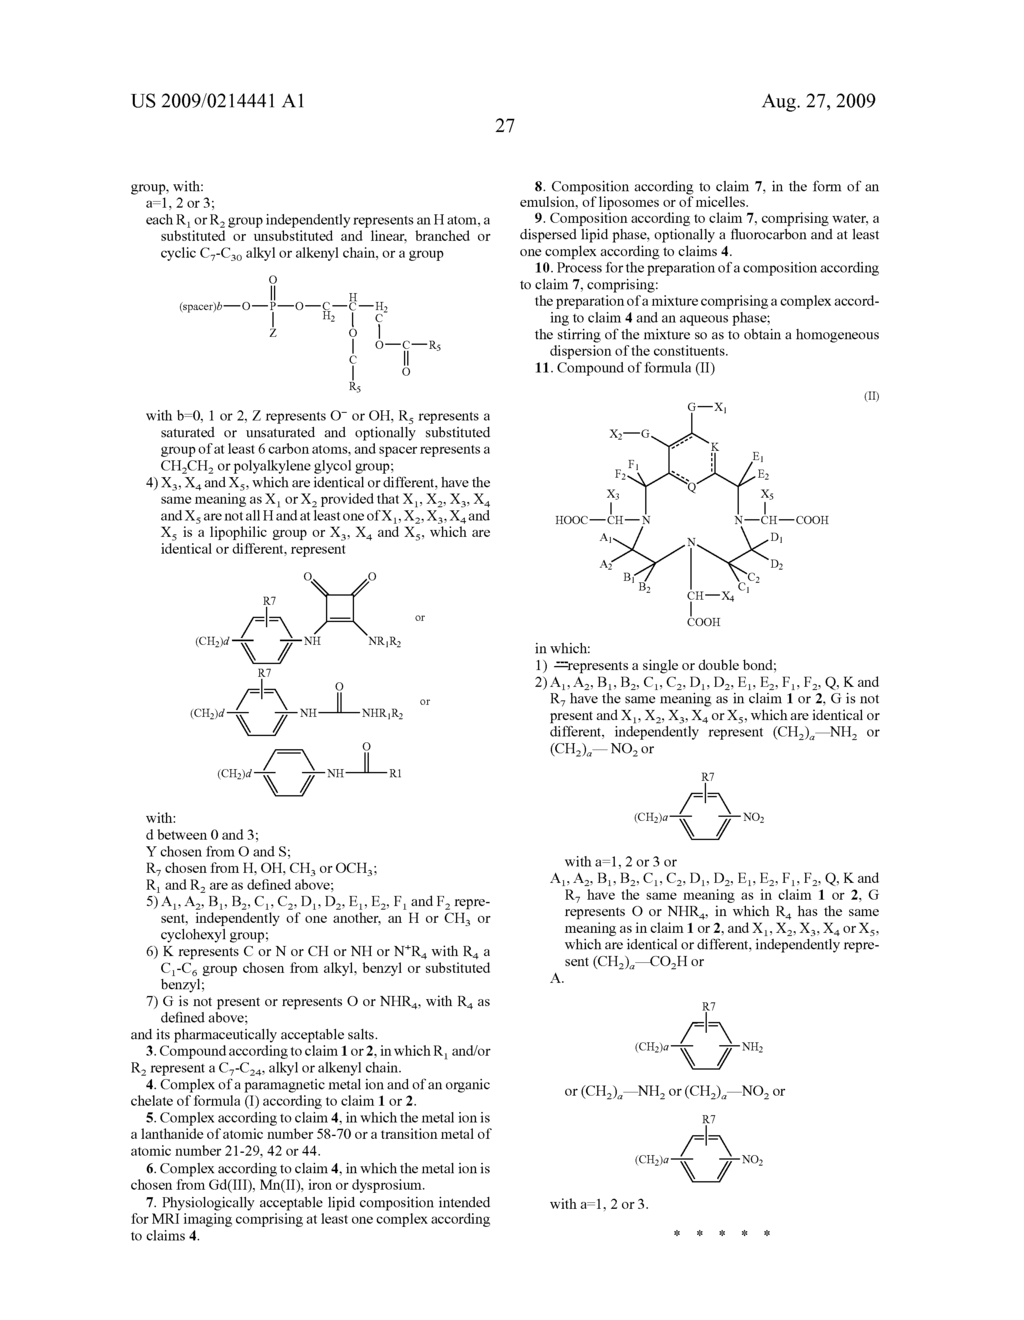 Lipophilic Chelates and Their Use in Imaging - diagram, schematic, and image 28